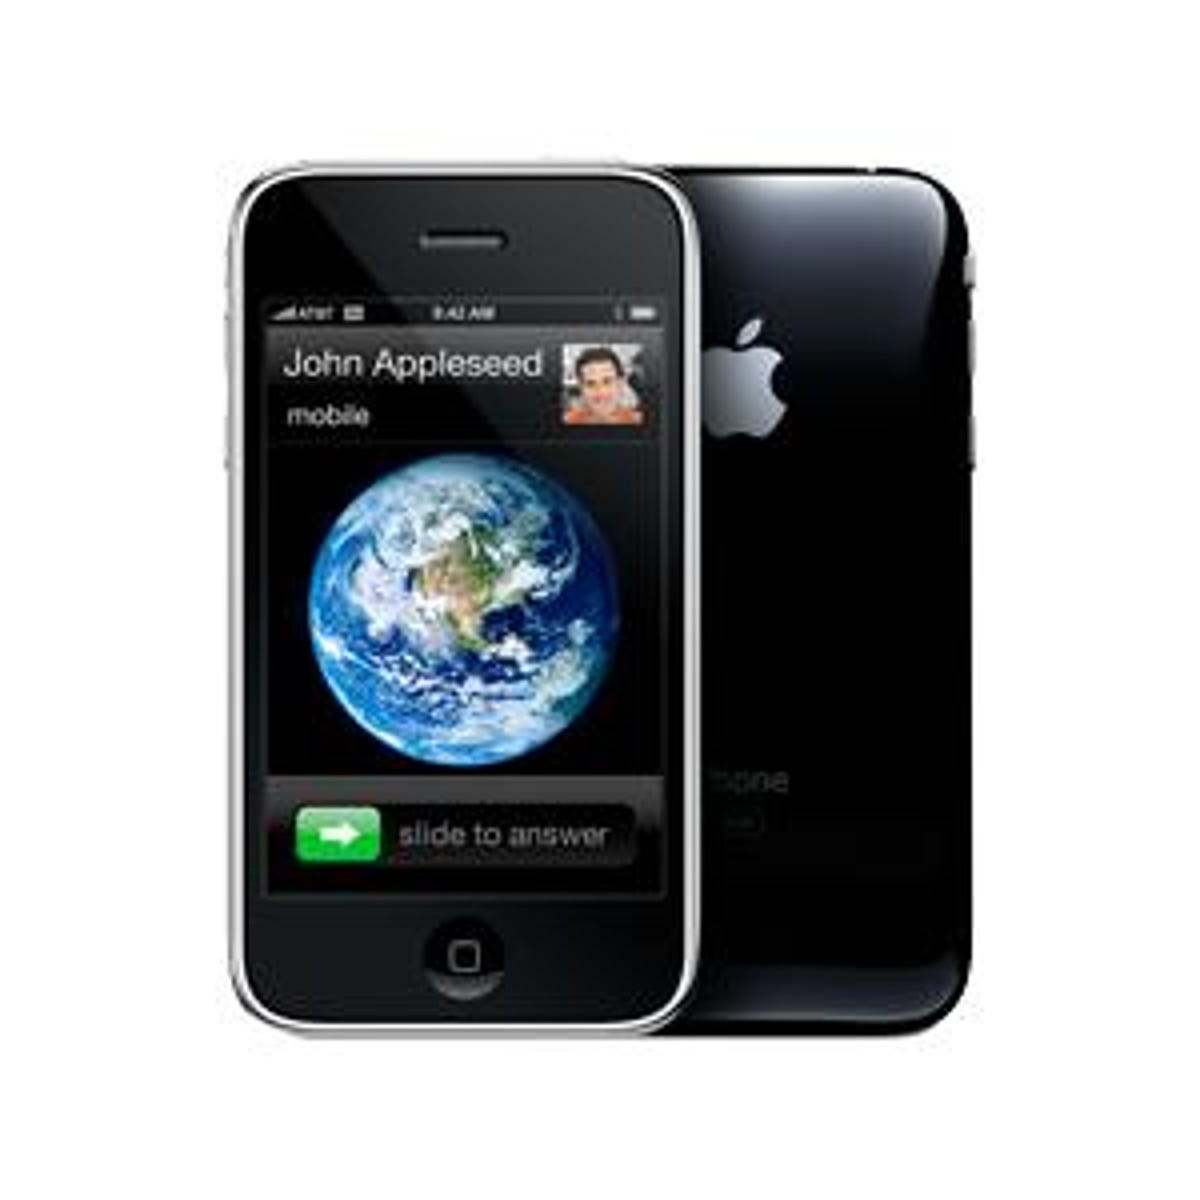 Apple iPhone 3G review: Apple iPhone 3G - CNET